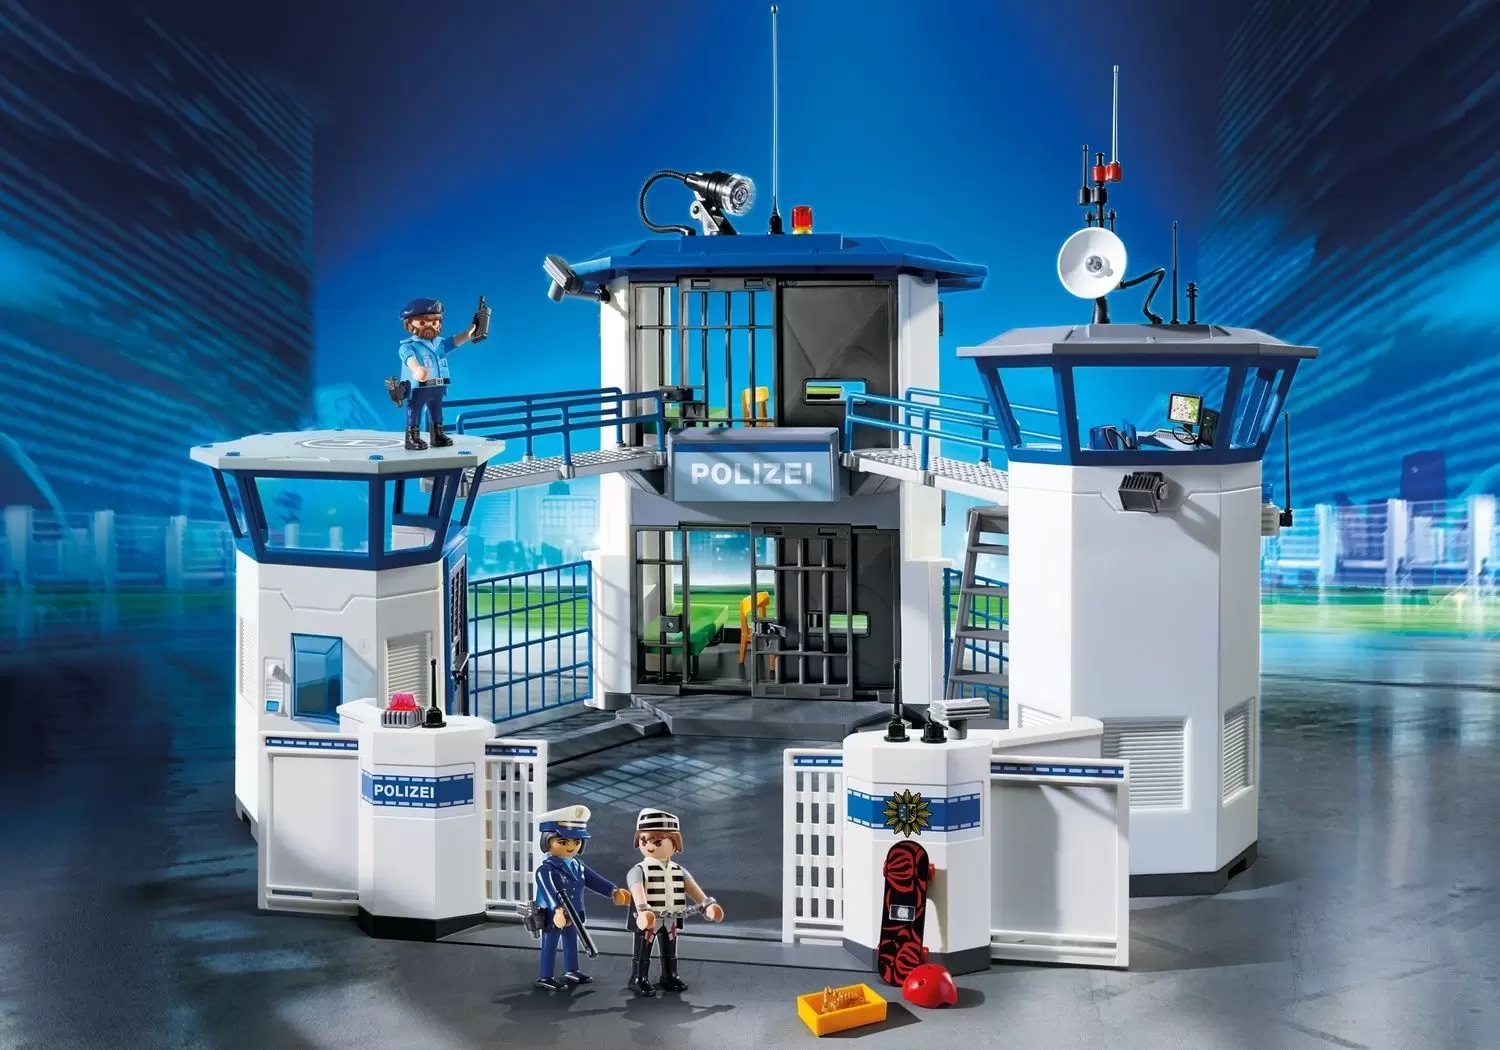 Police Playmobil - German Police command center with prison (Polizei)